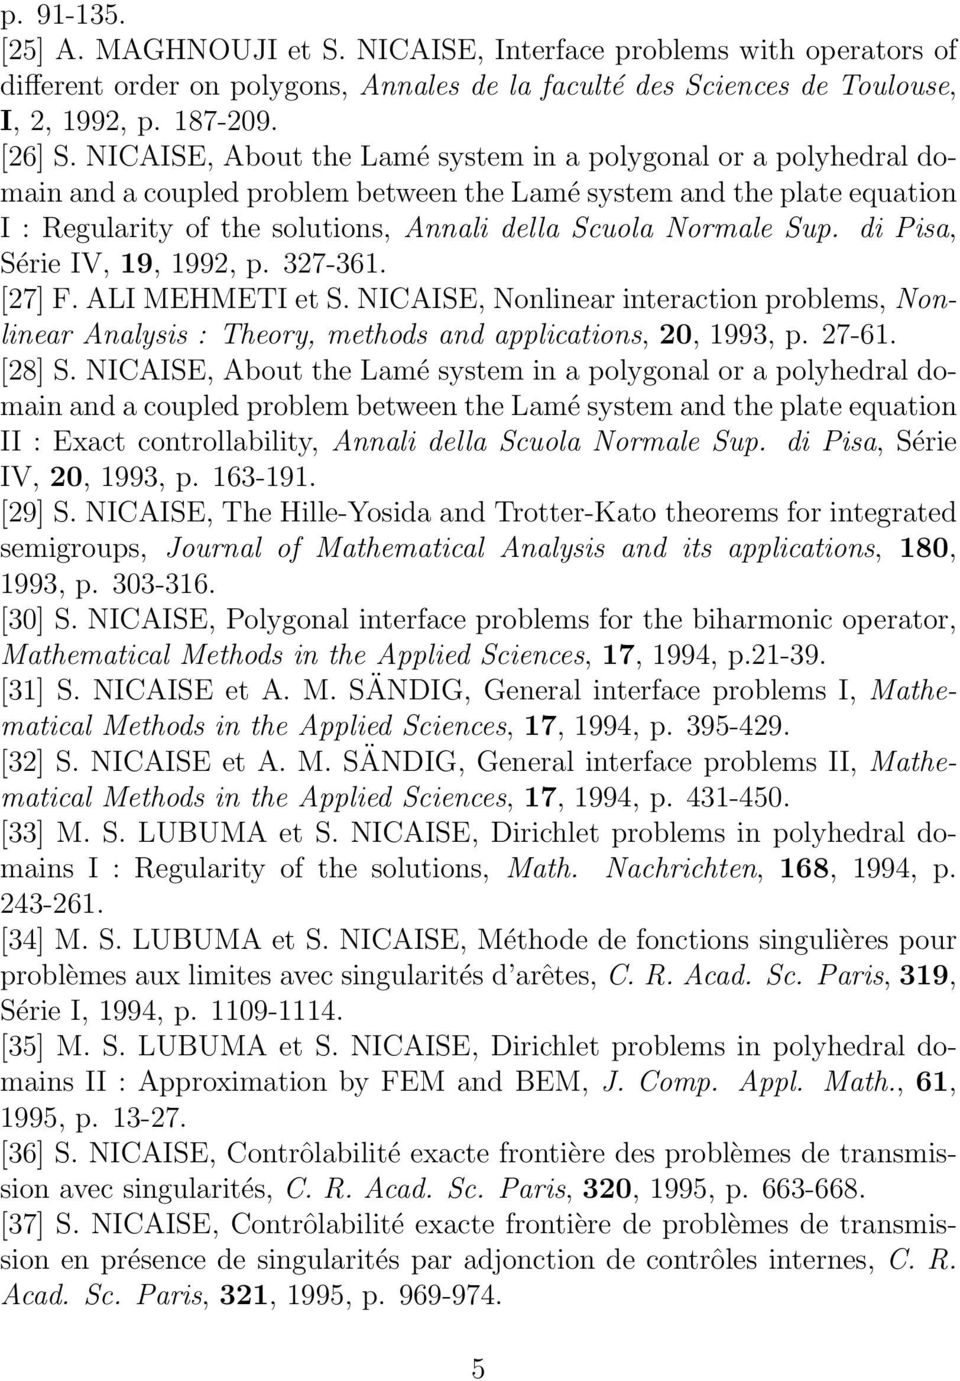 Sup. di Pisa, Série IV, 19, 1992, p. 327-361. [27] F. ALI MEHMETI et S. NICAISE, Nonlinear interaction problems, Nonlinear Analysis : Theory, methods and applications, 20, 1993, p. 27-61. [28] S.